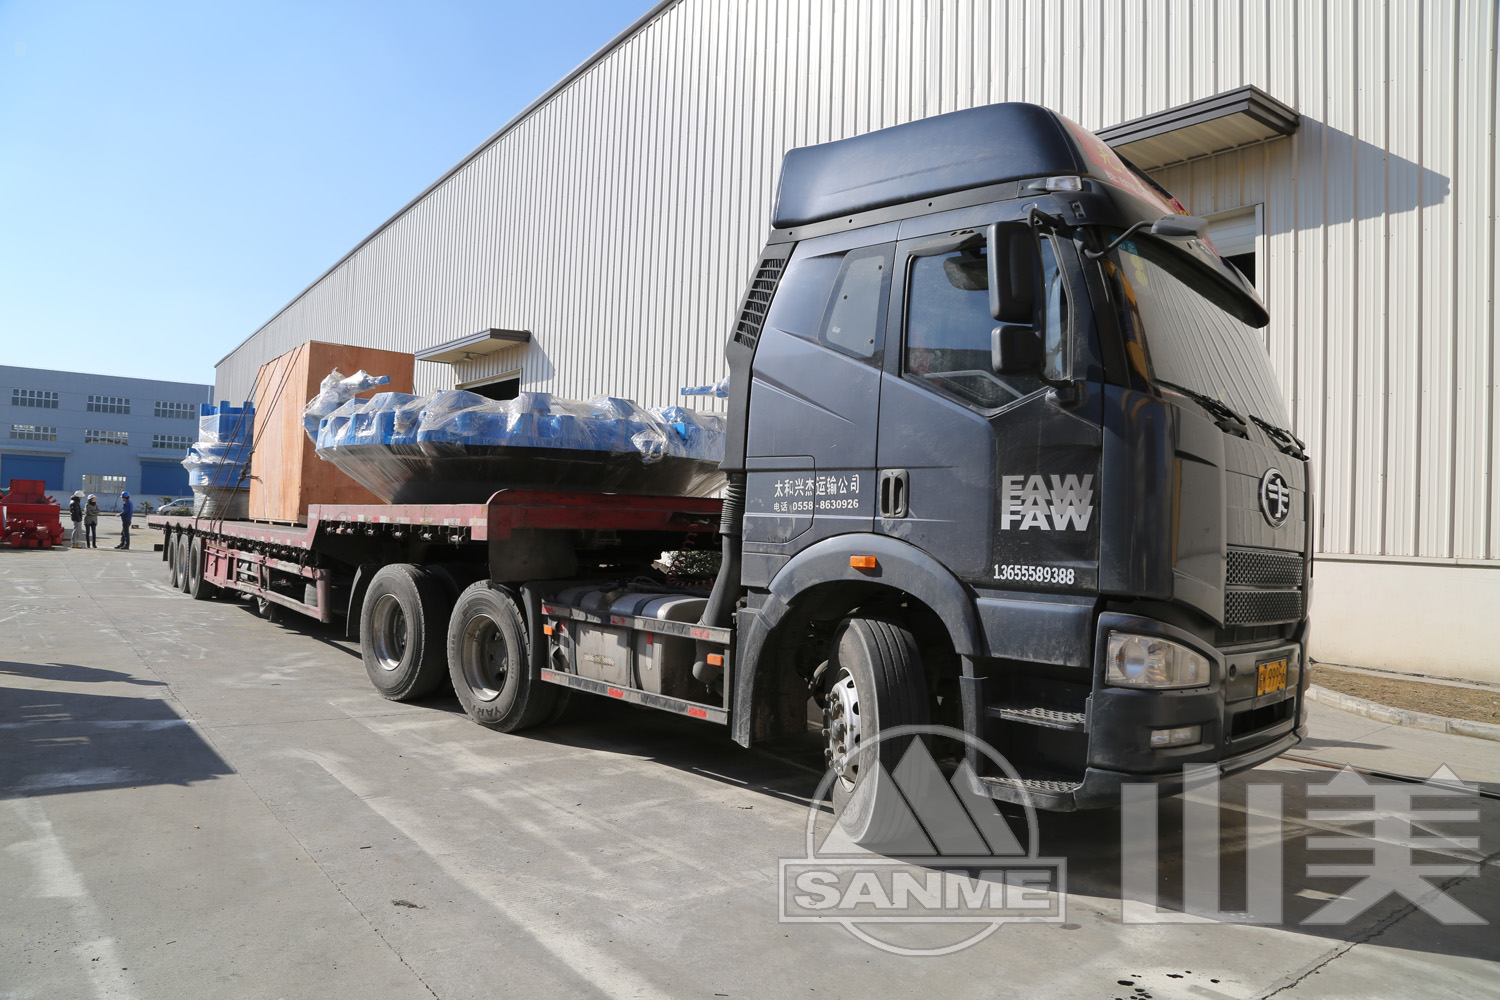 SANME SDY 2100D Cone Crusher Being Delivered to Kazakhstan in 2014